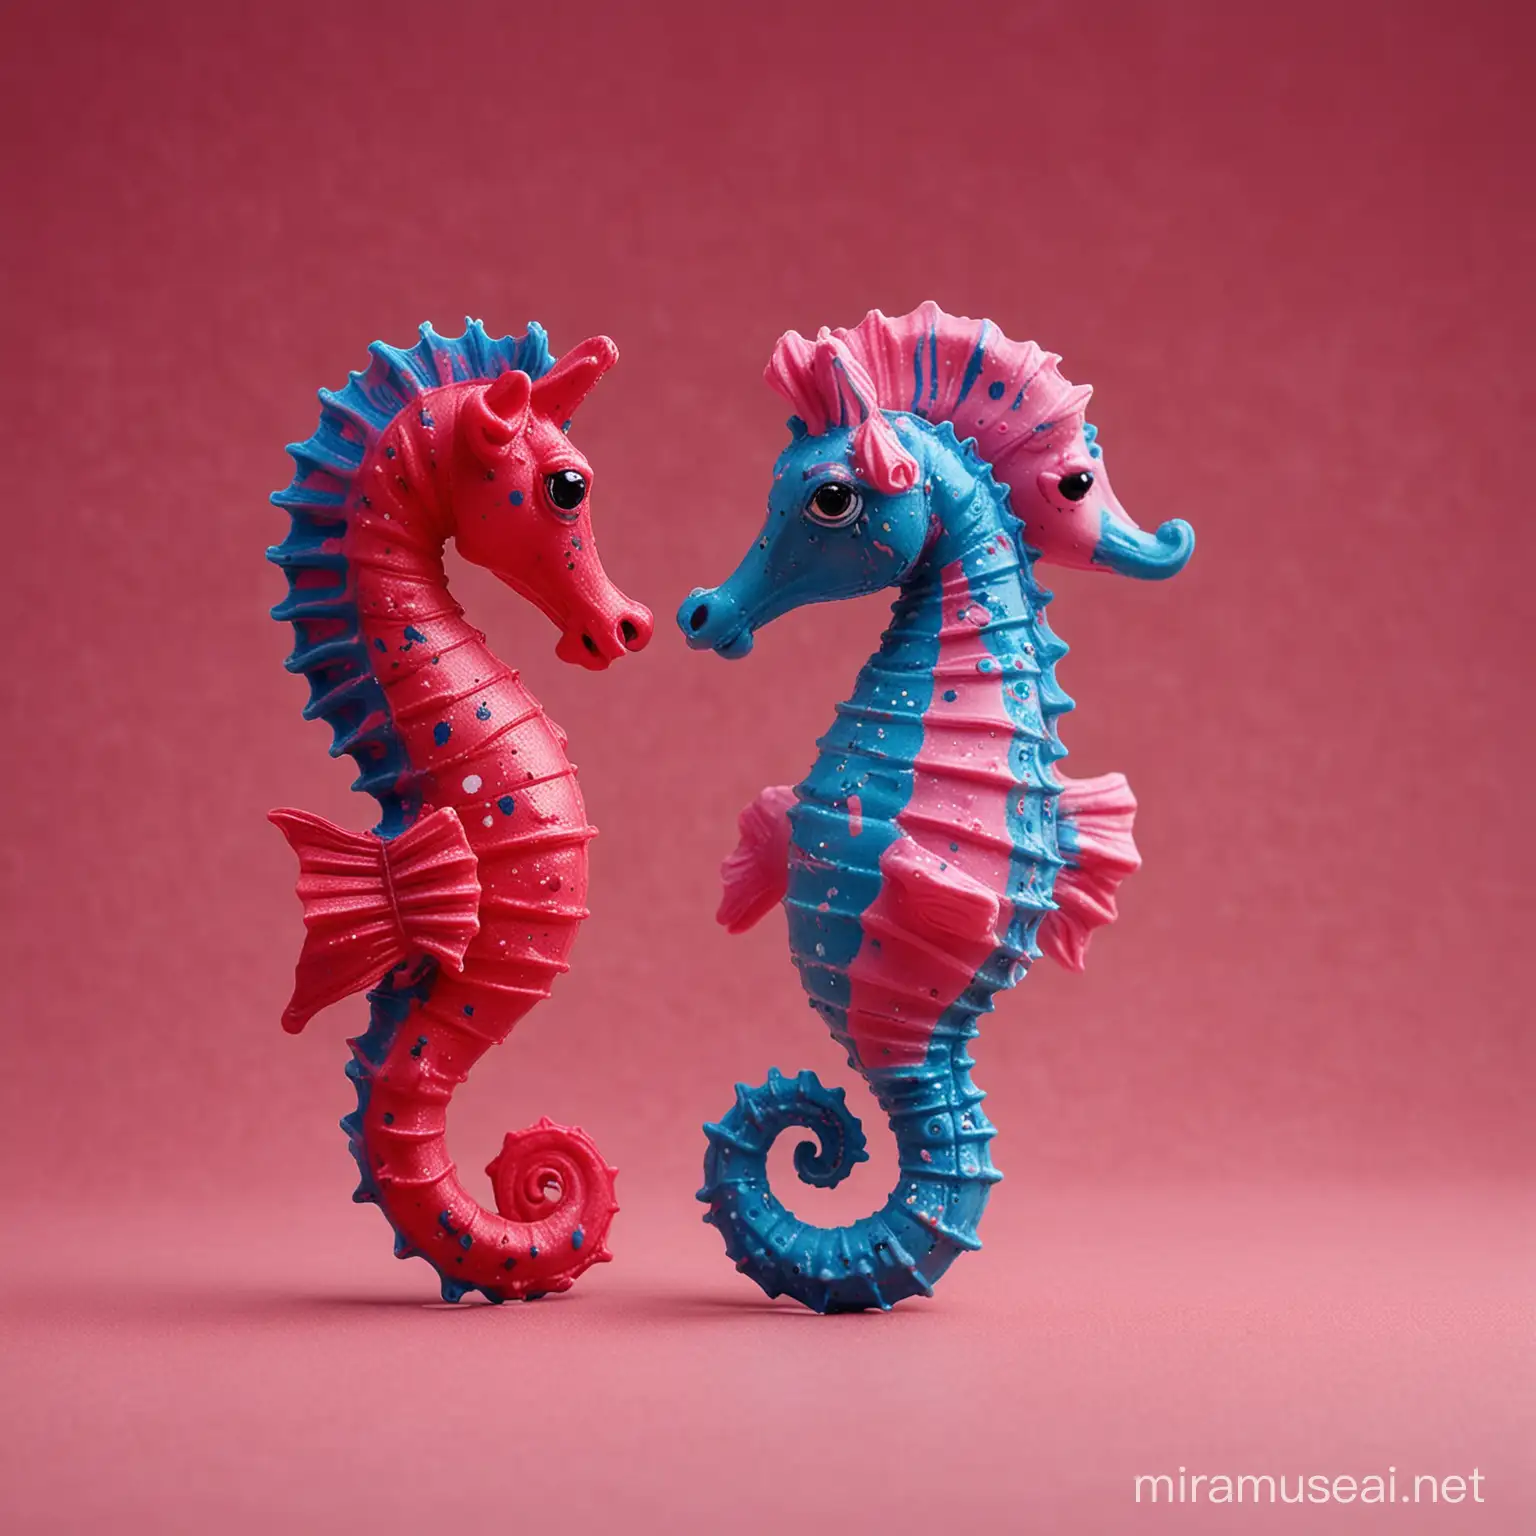 blue toy seahorse and pink toy seahorse, red background, low light